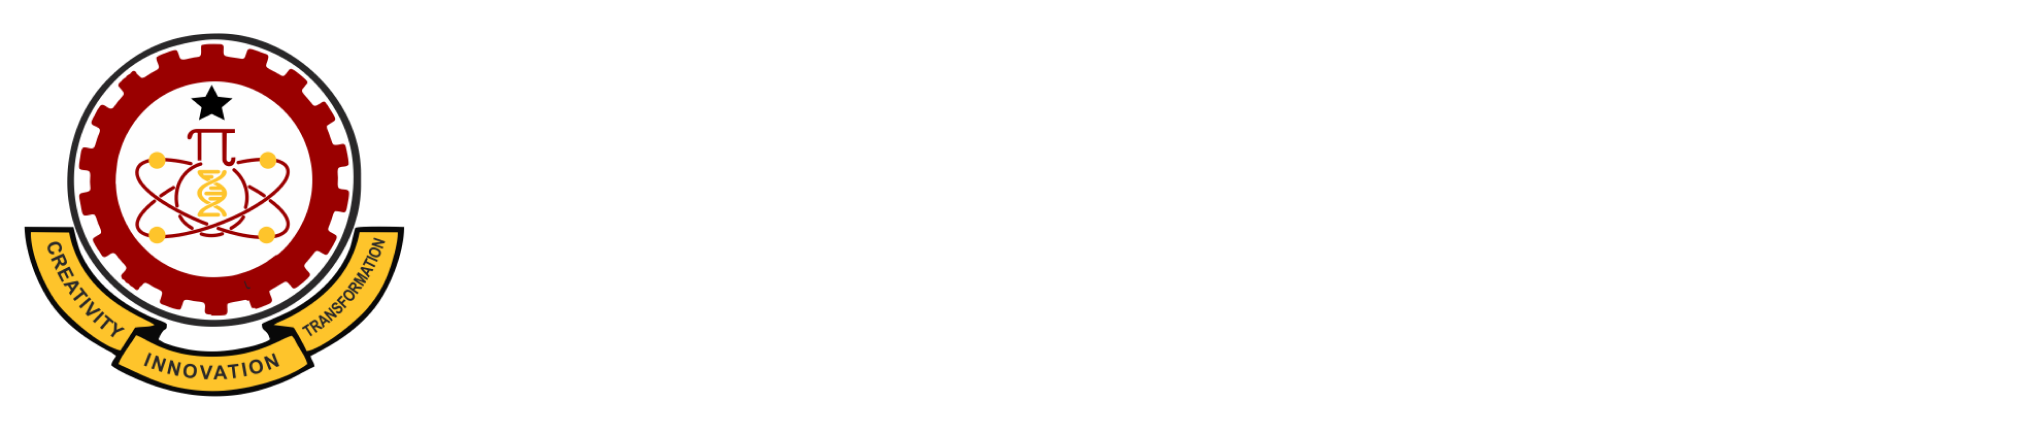 School of chemical and biochemical Sciences - CKT-UTAS